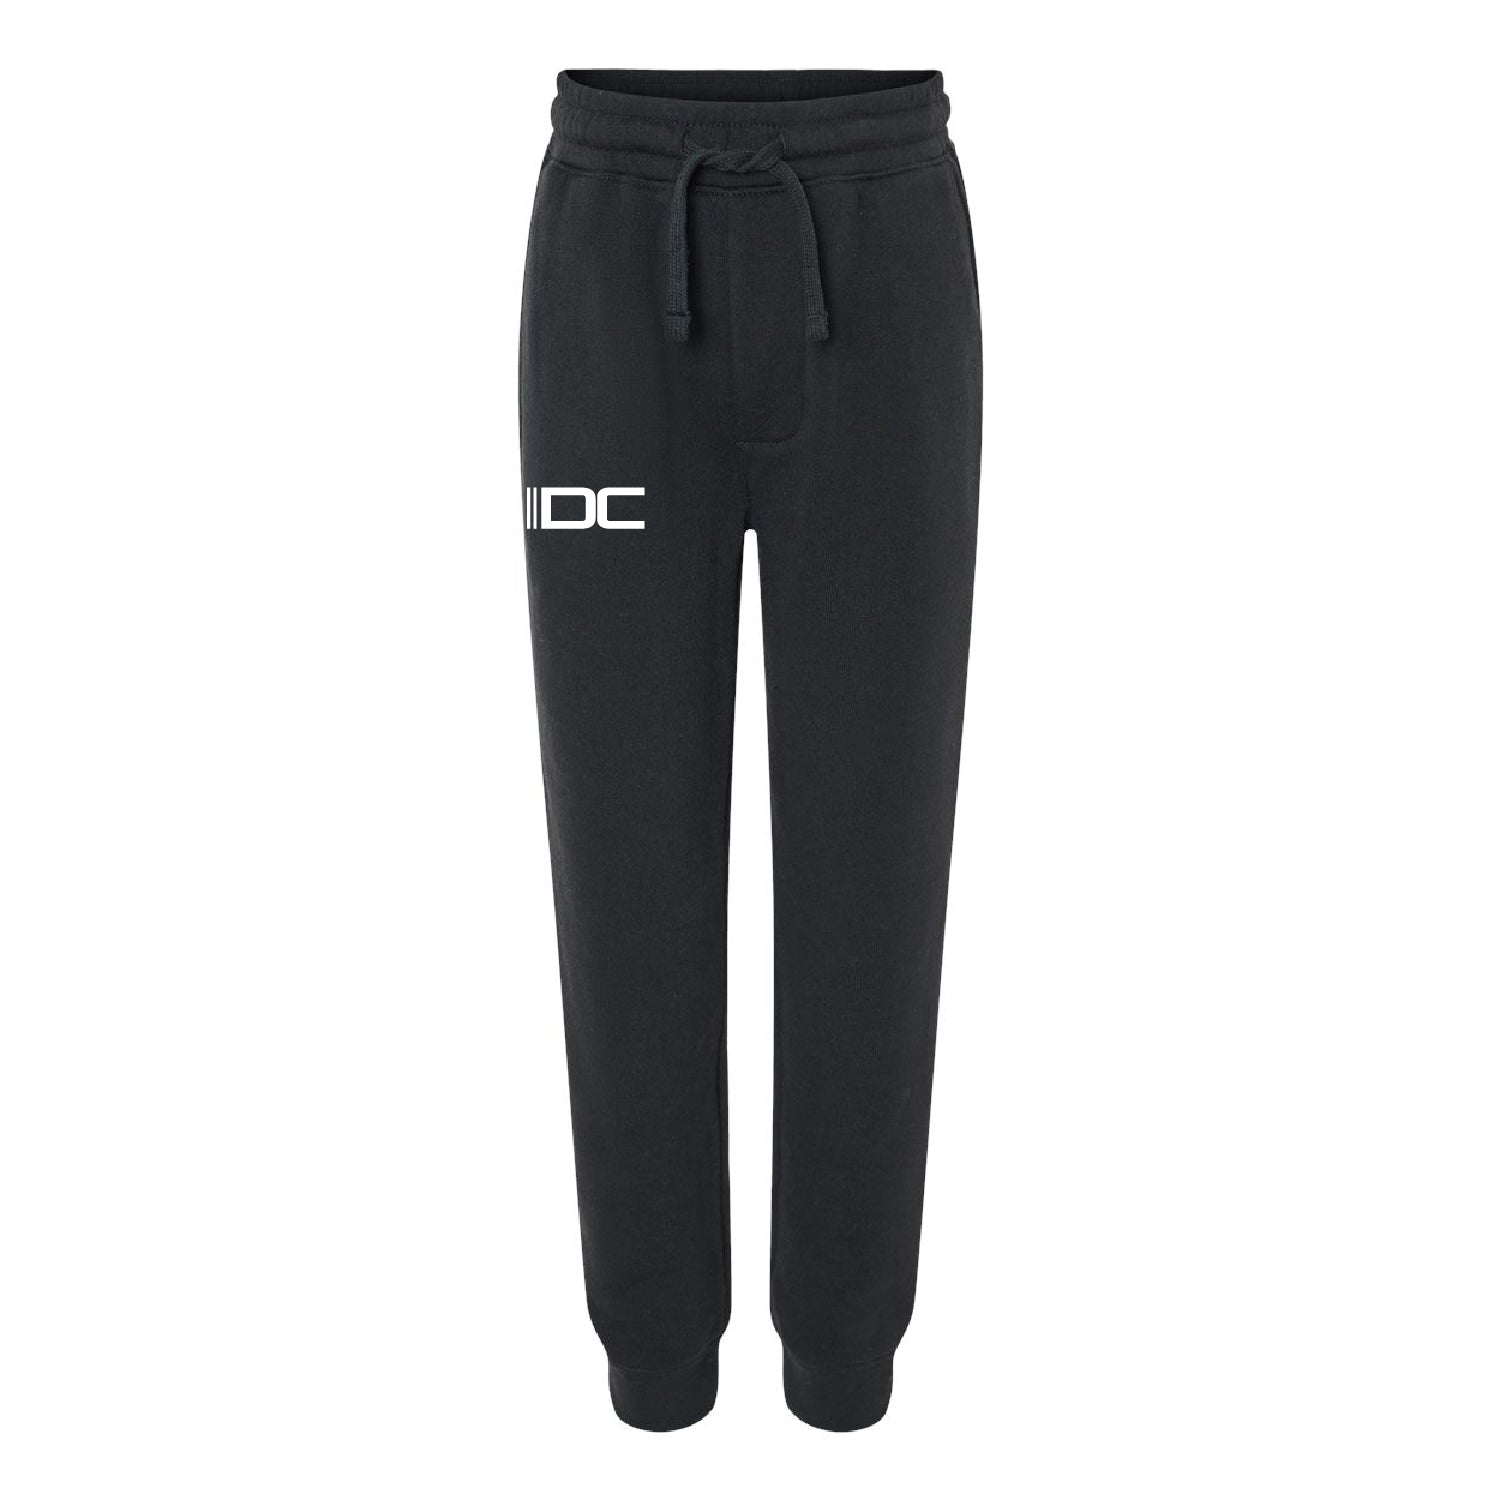 IDC Youth Lightweight Special Blend Sweatpants - DSP On Demand